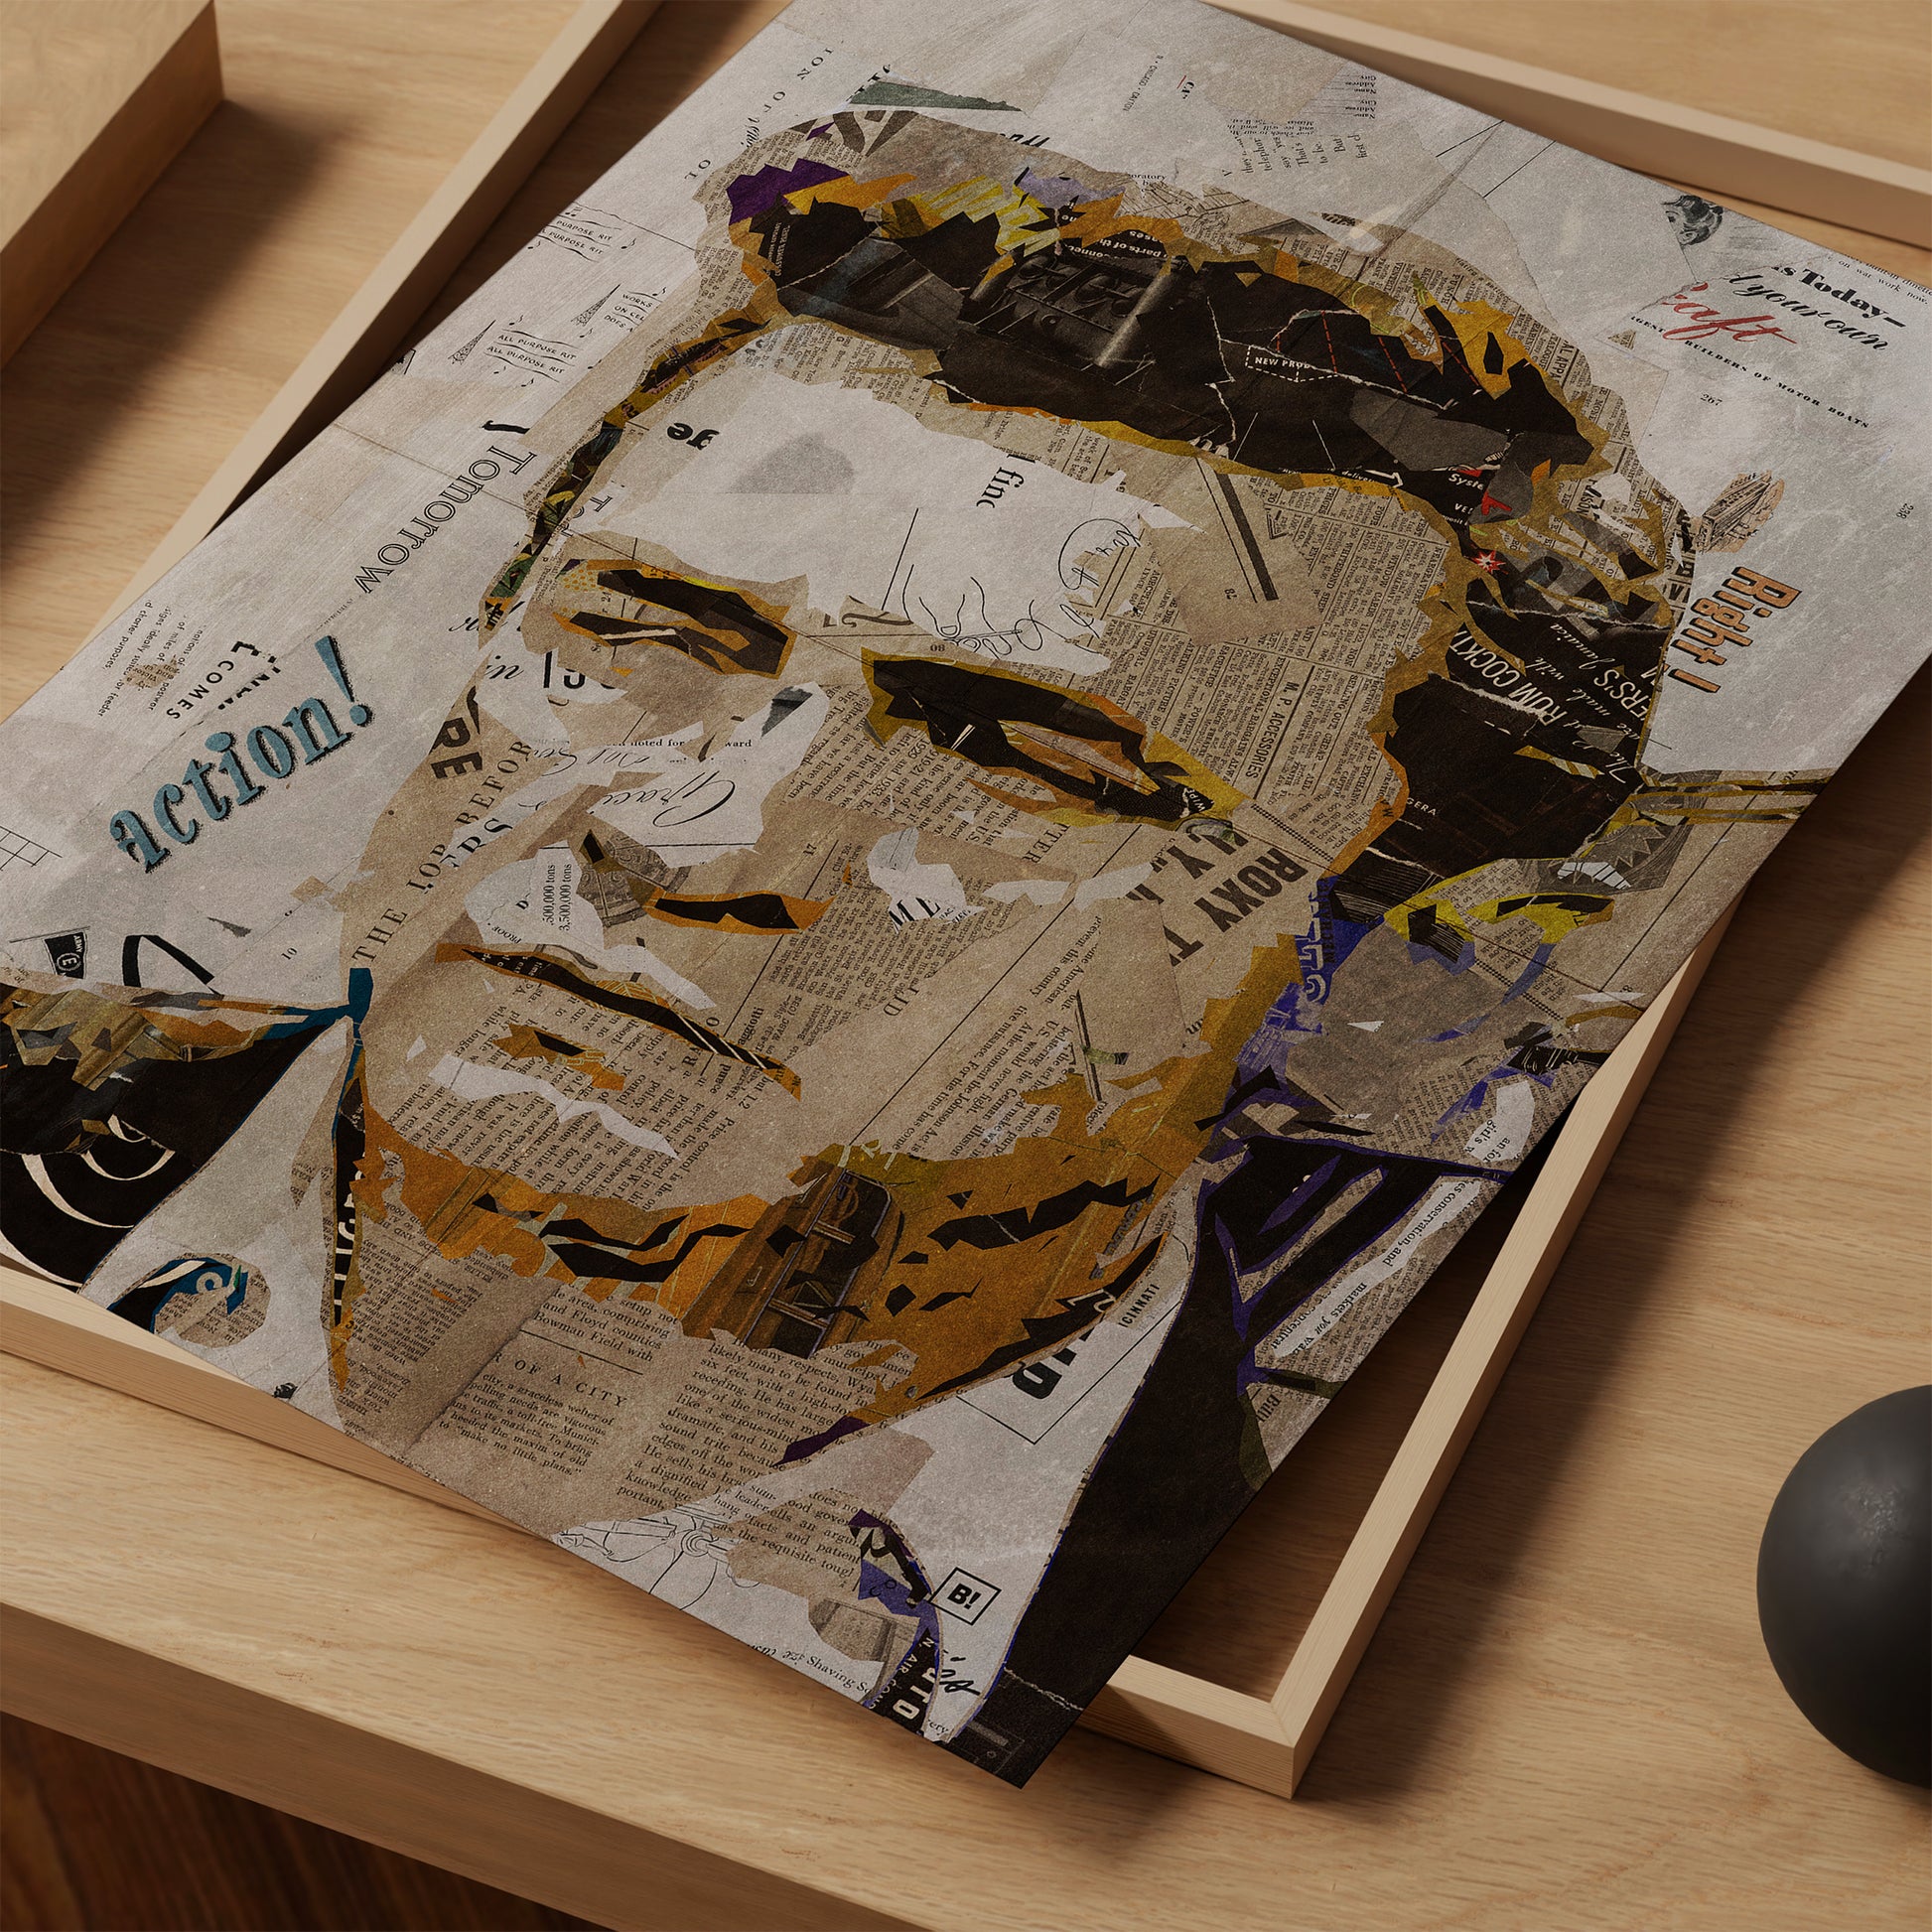 Be inspired by our iconic collage portrait art print of Johnny Cash. This artwork was printed using the giclée process on archival acid-free paper and is presented as a print close-up, capturing its timeless beauty in every detail.